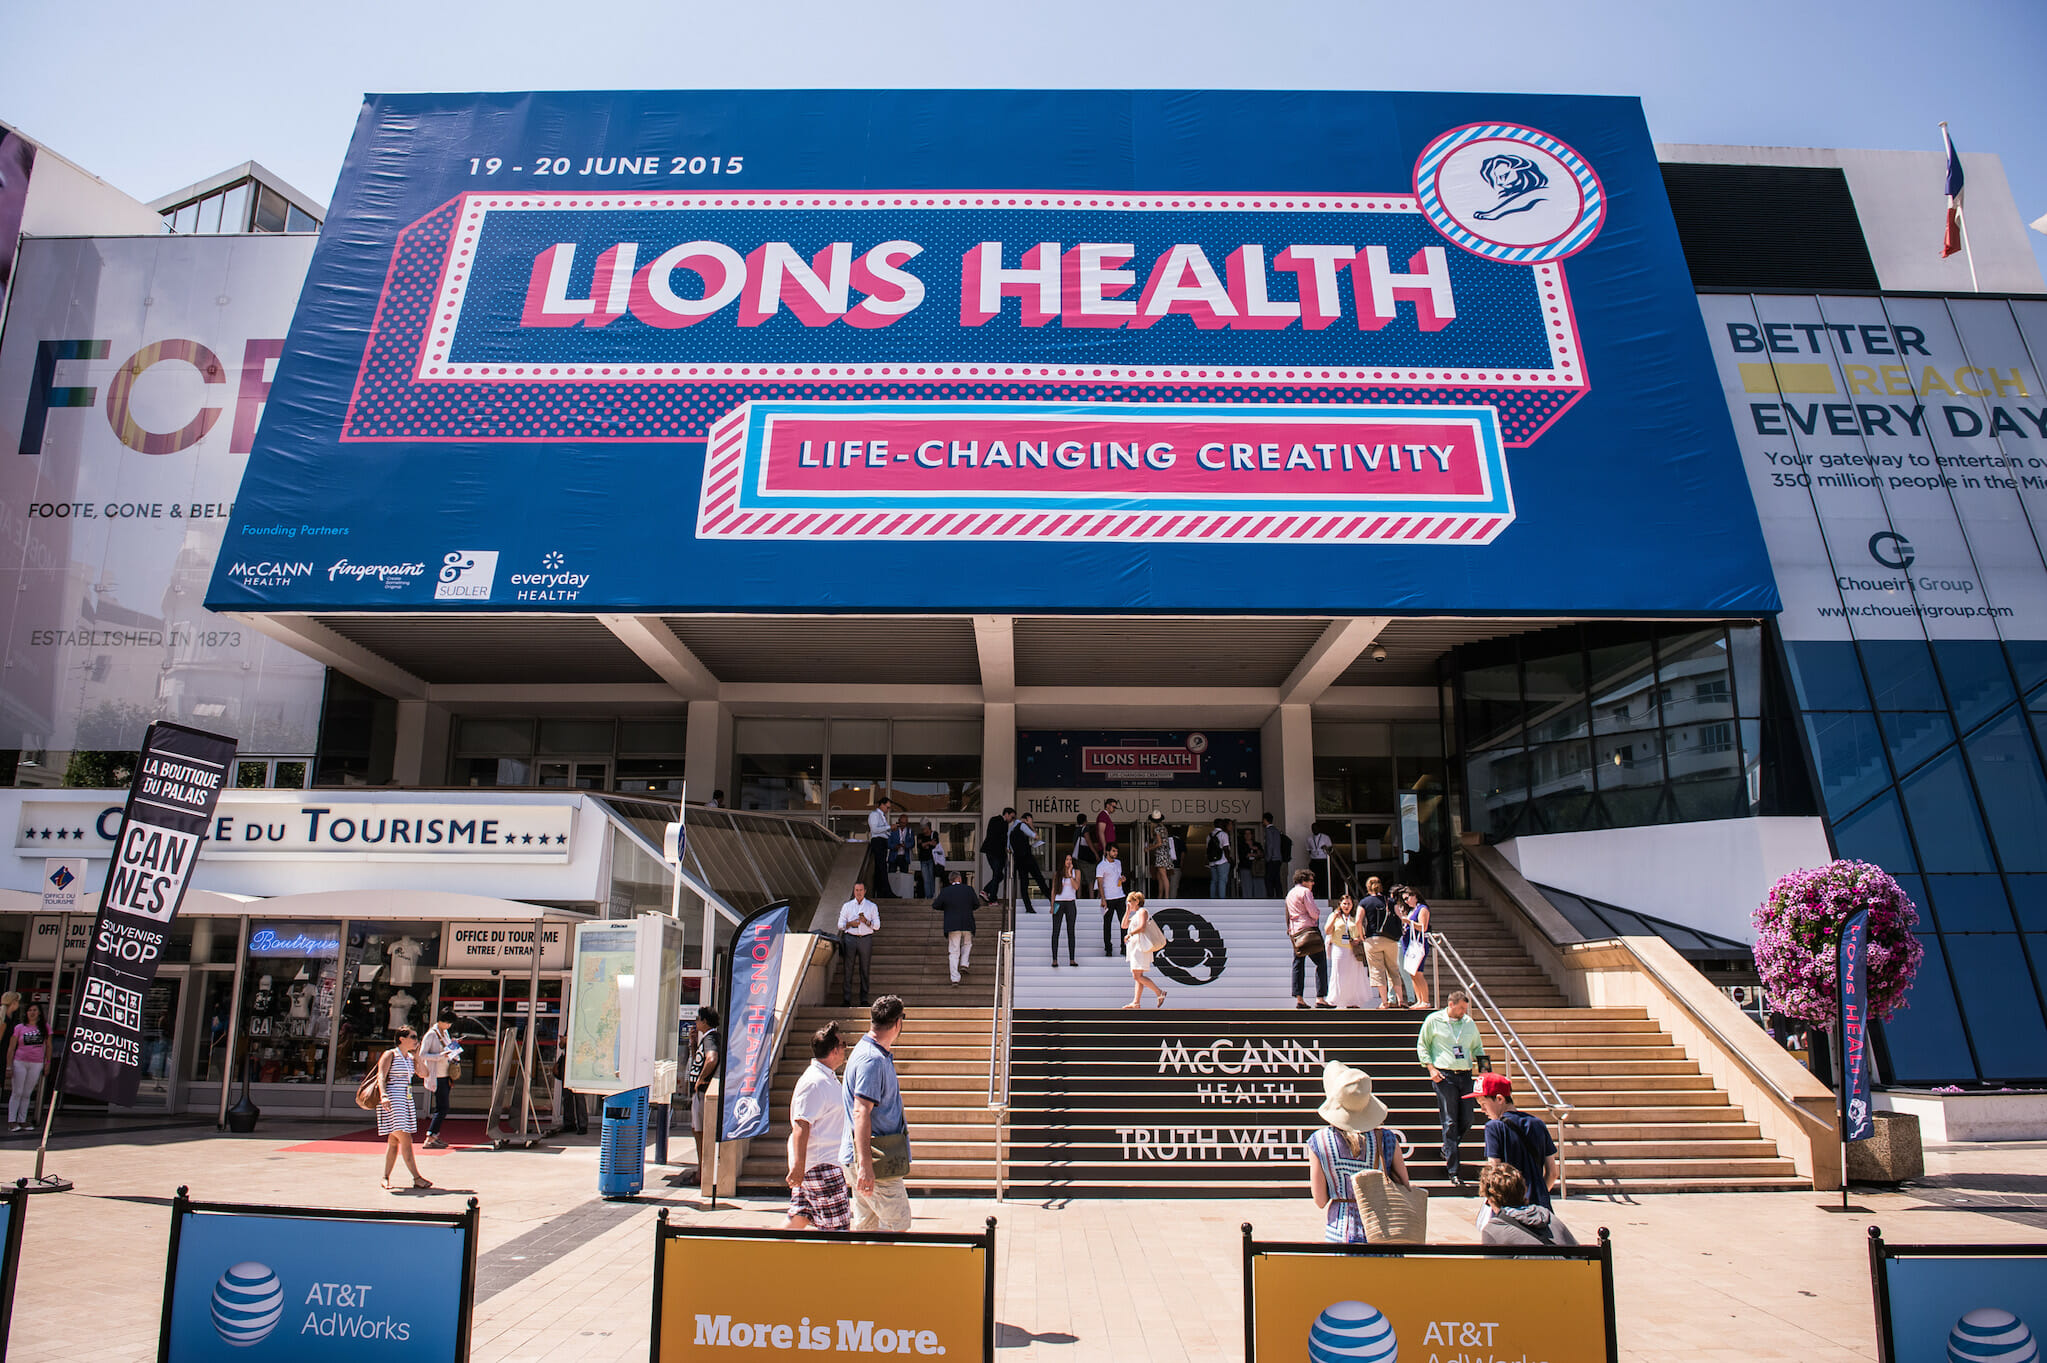 Cannes Lions sees record 43,000 award submissions